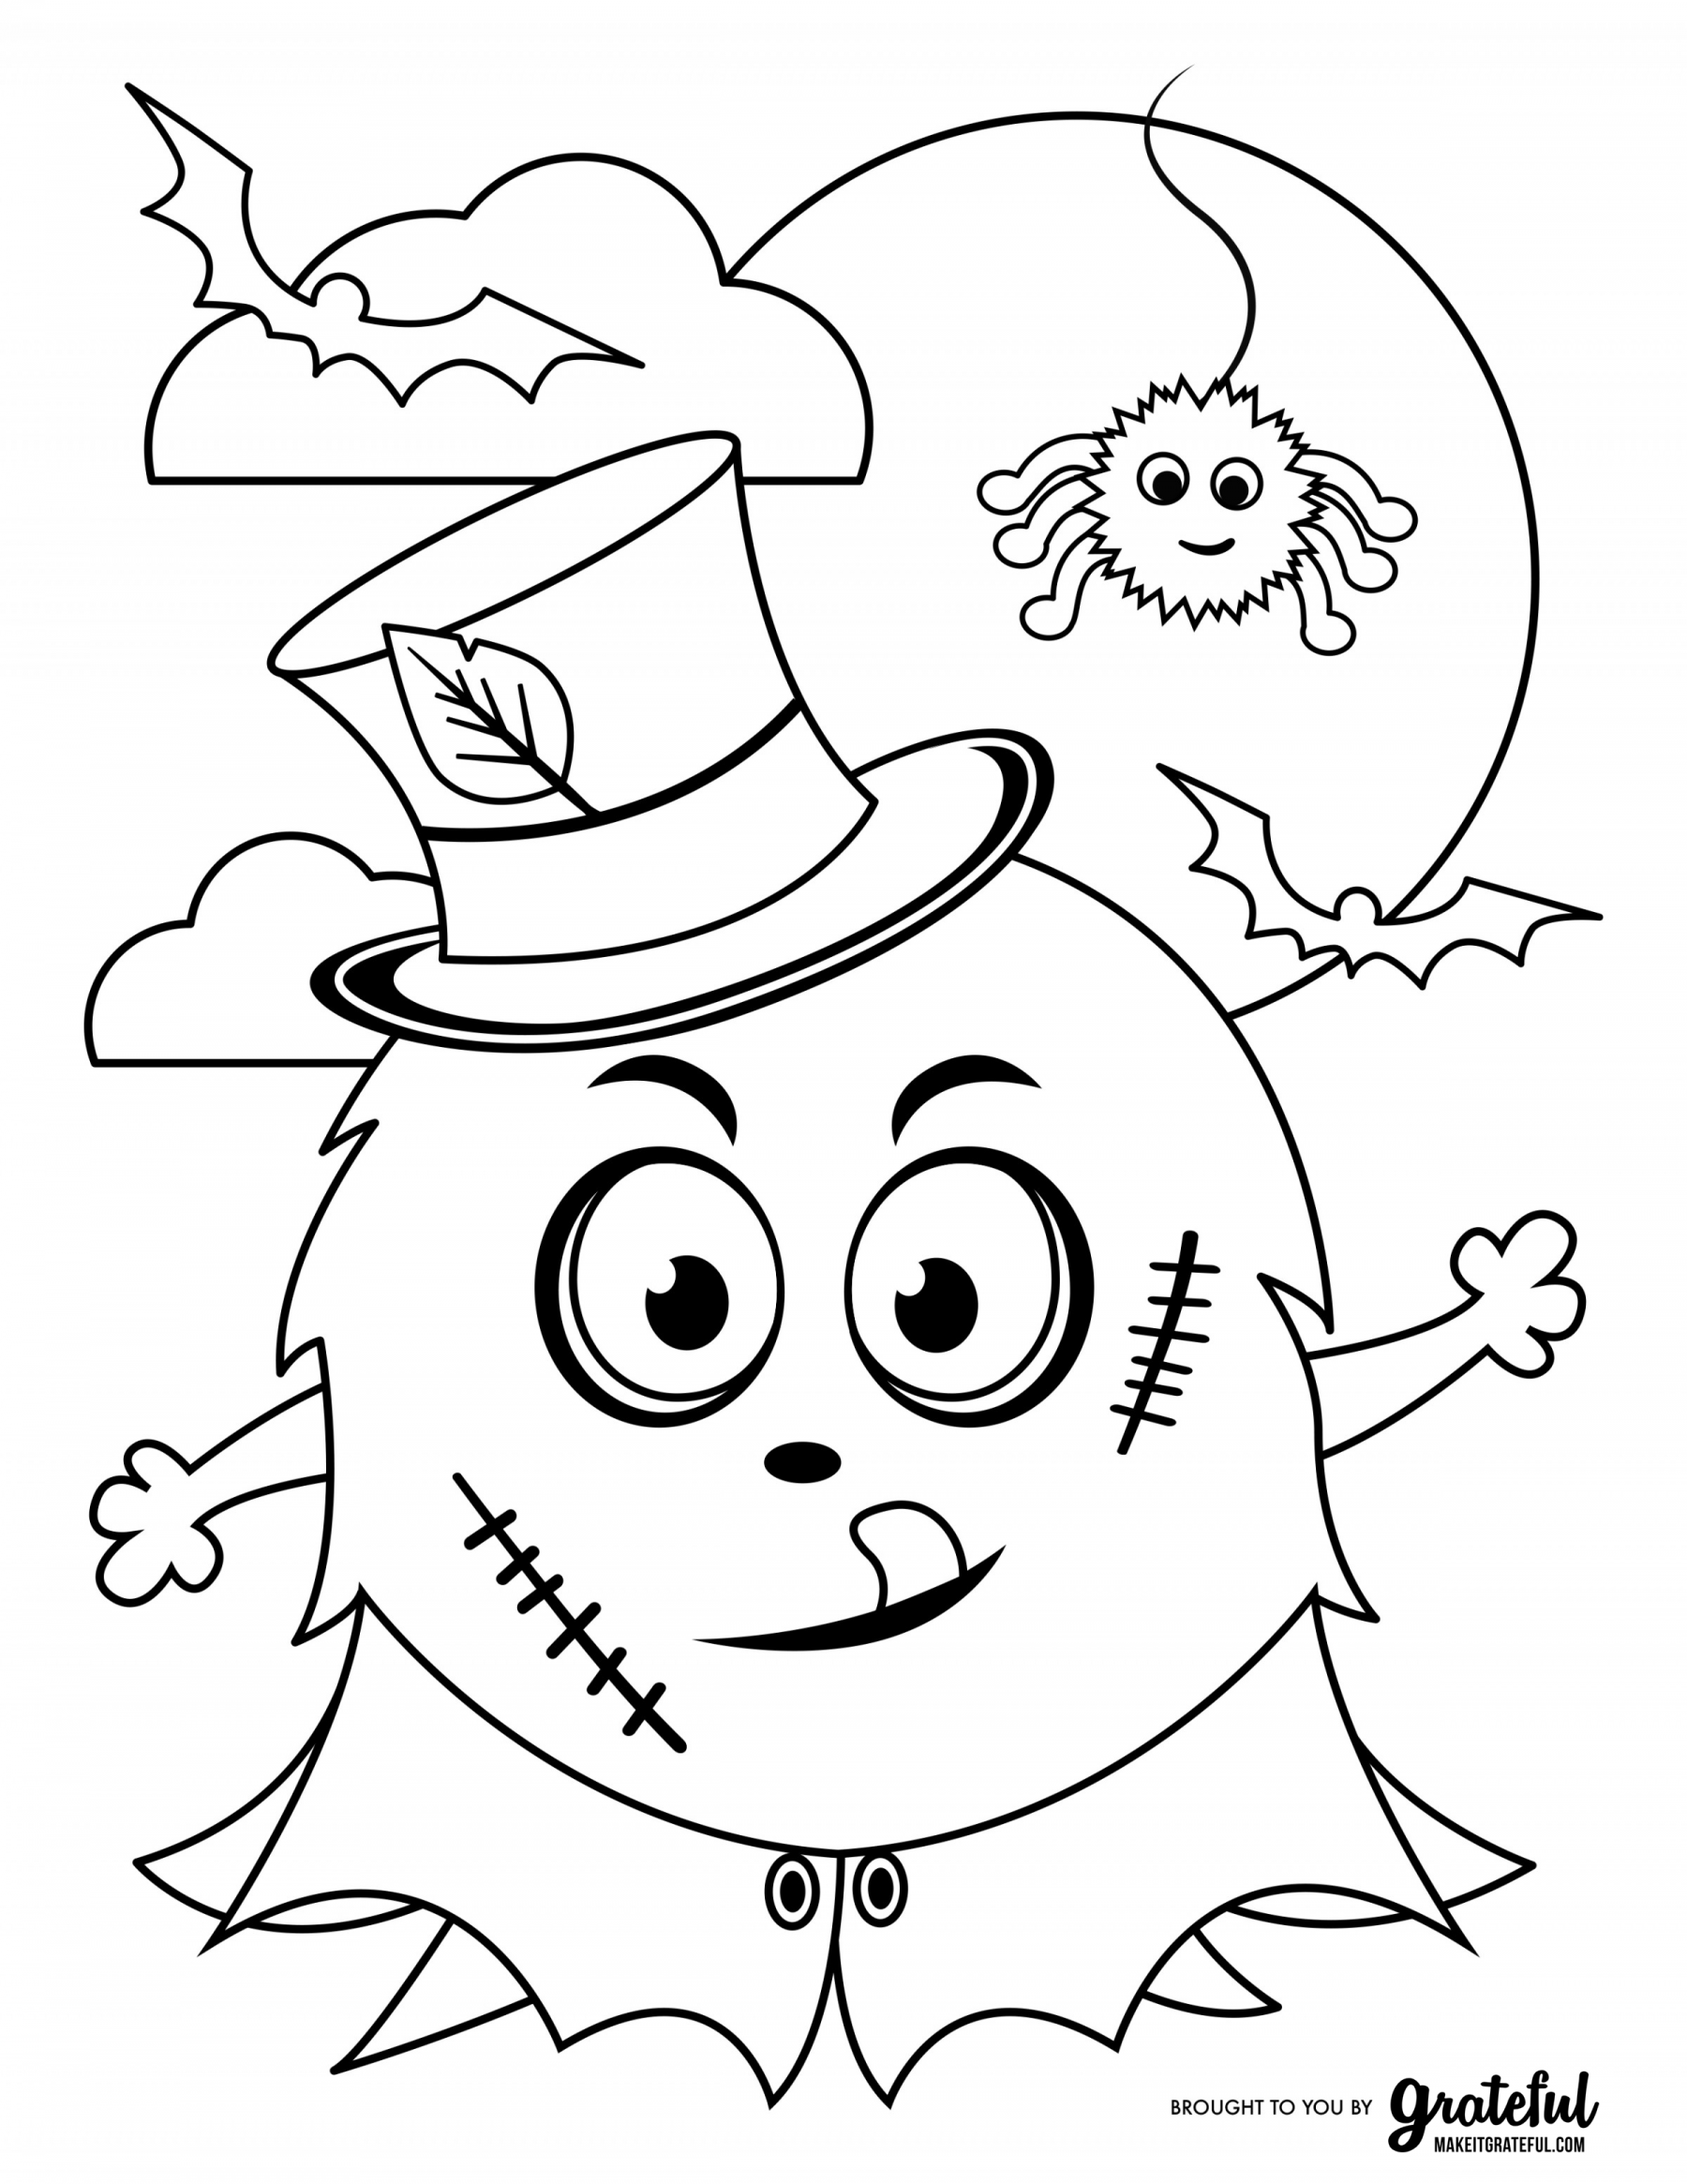 Free Halloween Coloring Page For Kids (or For The Kid In You